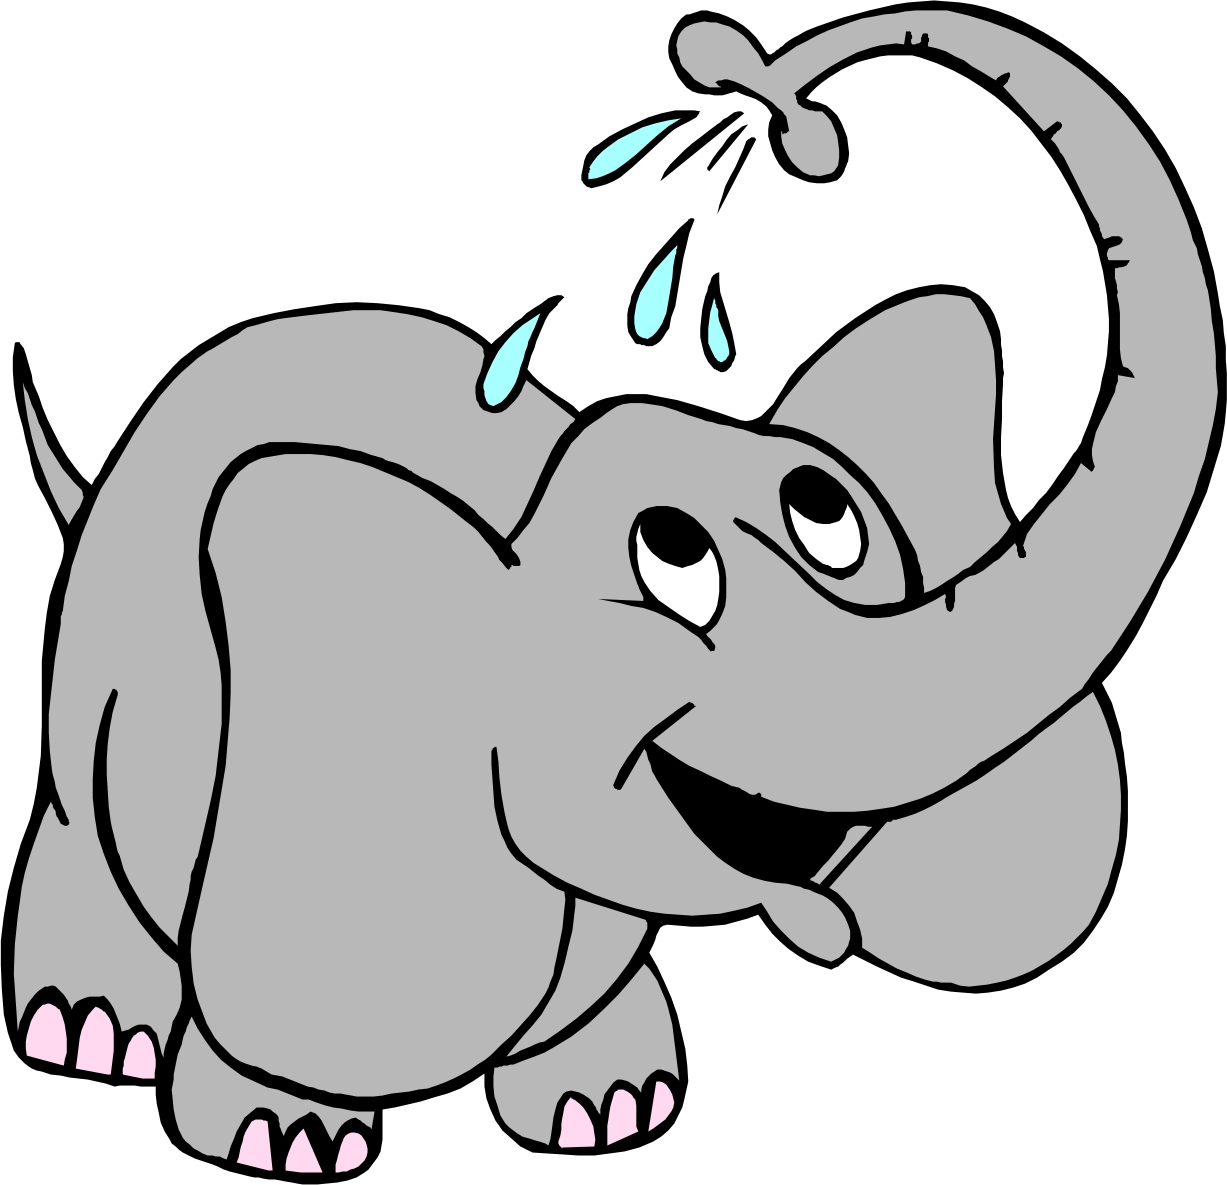 Cartoon Elephant Spraying Water Your Top HD Wallpapers # ...